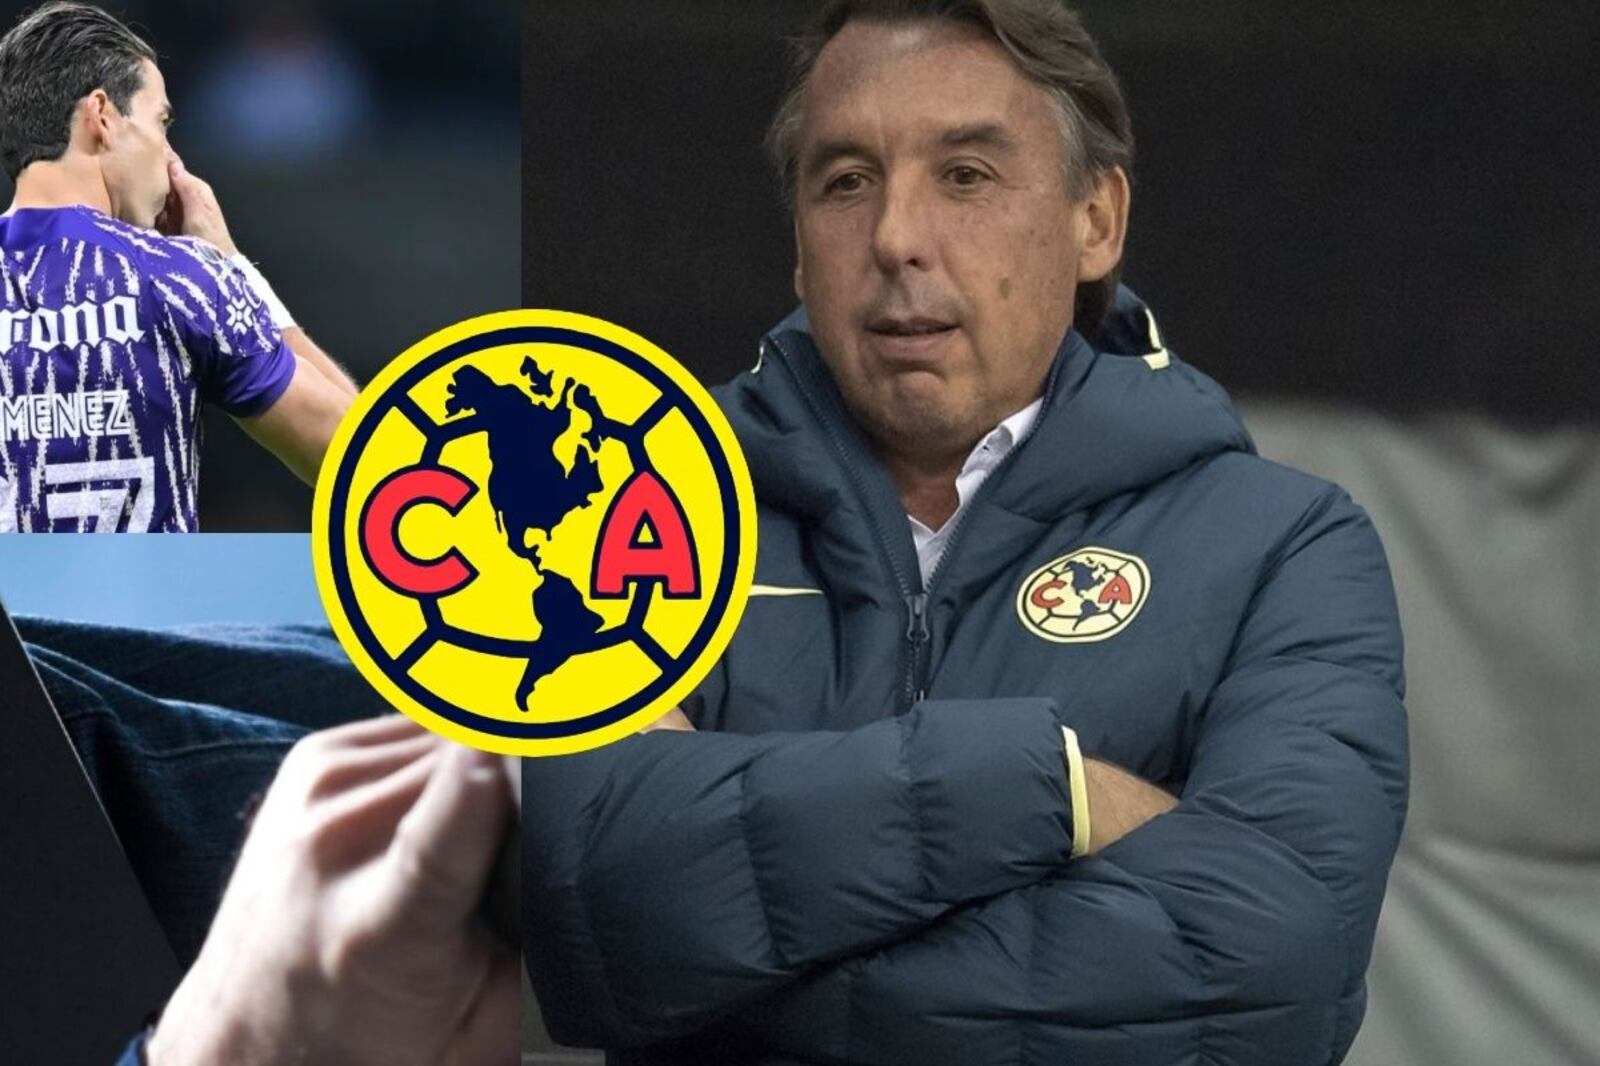 Is Jimenez leaving? The 3 casualties of América are confirmed after the defeat